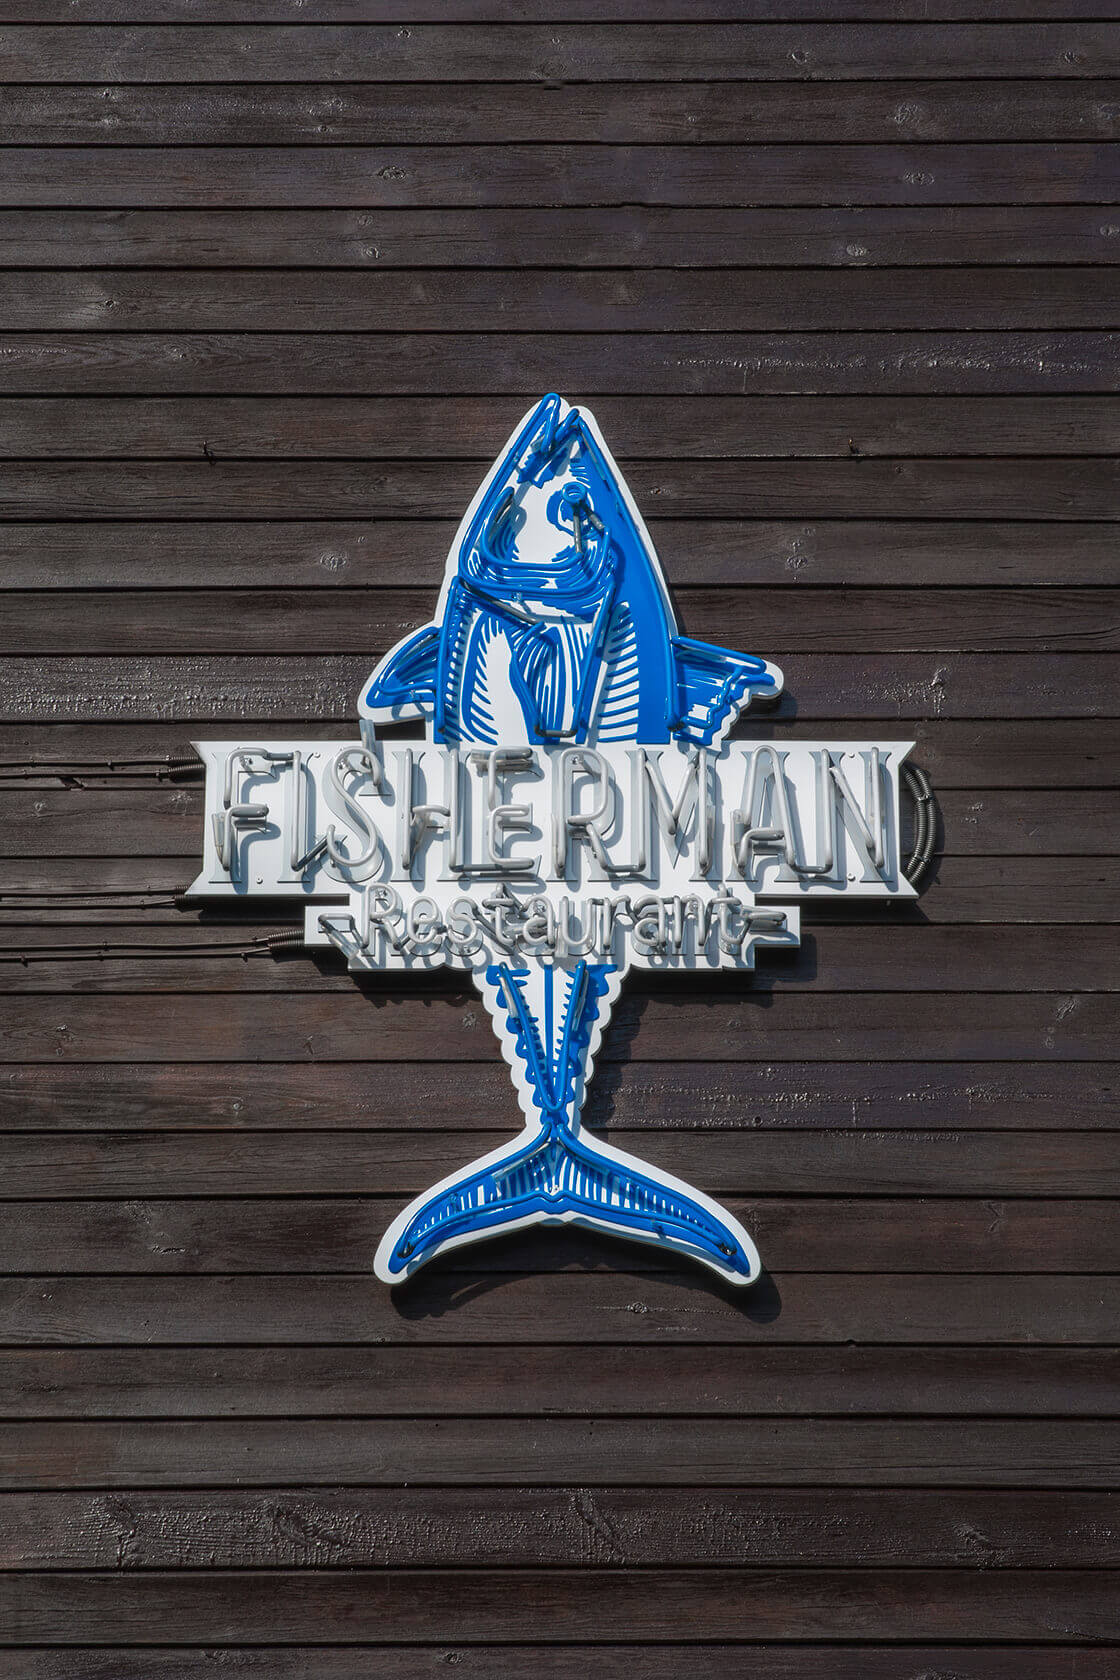 fisherman fisher man - fisherman-restaurant-neon-blue-white-neon-on-the-wall-restaurant-neon-on-desks-neon-at-height-under-lighted-fish-neon-at-the-entry-sopot (28)  